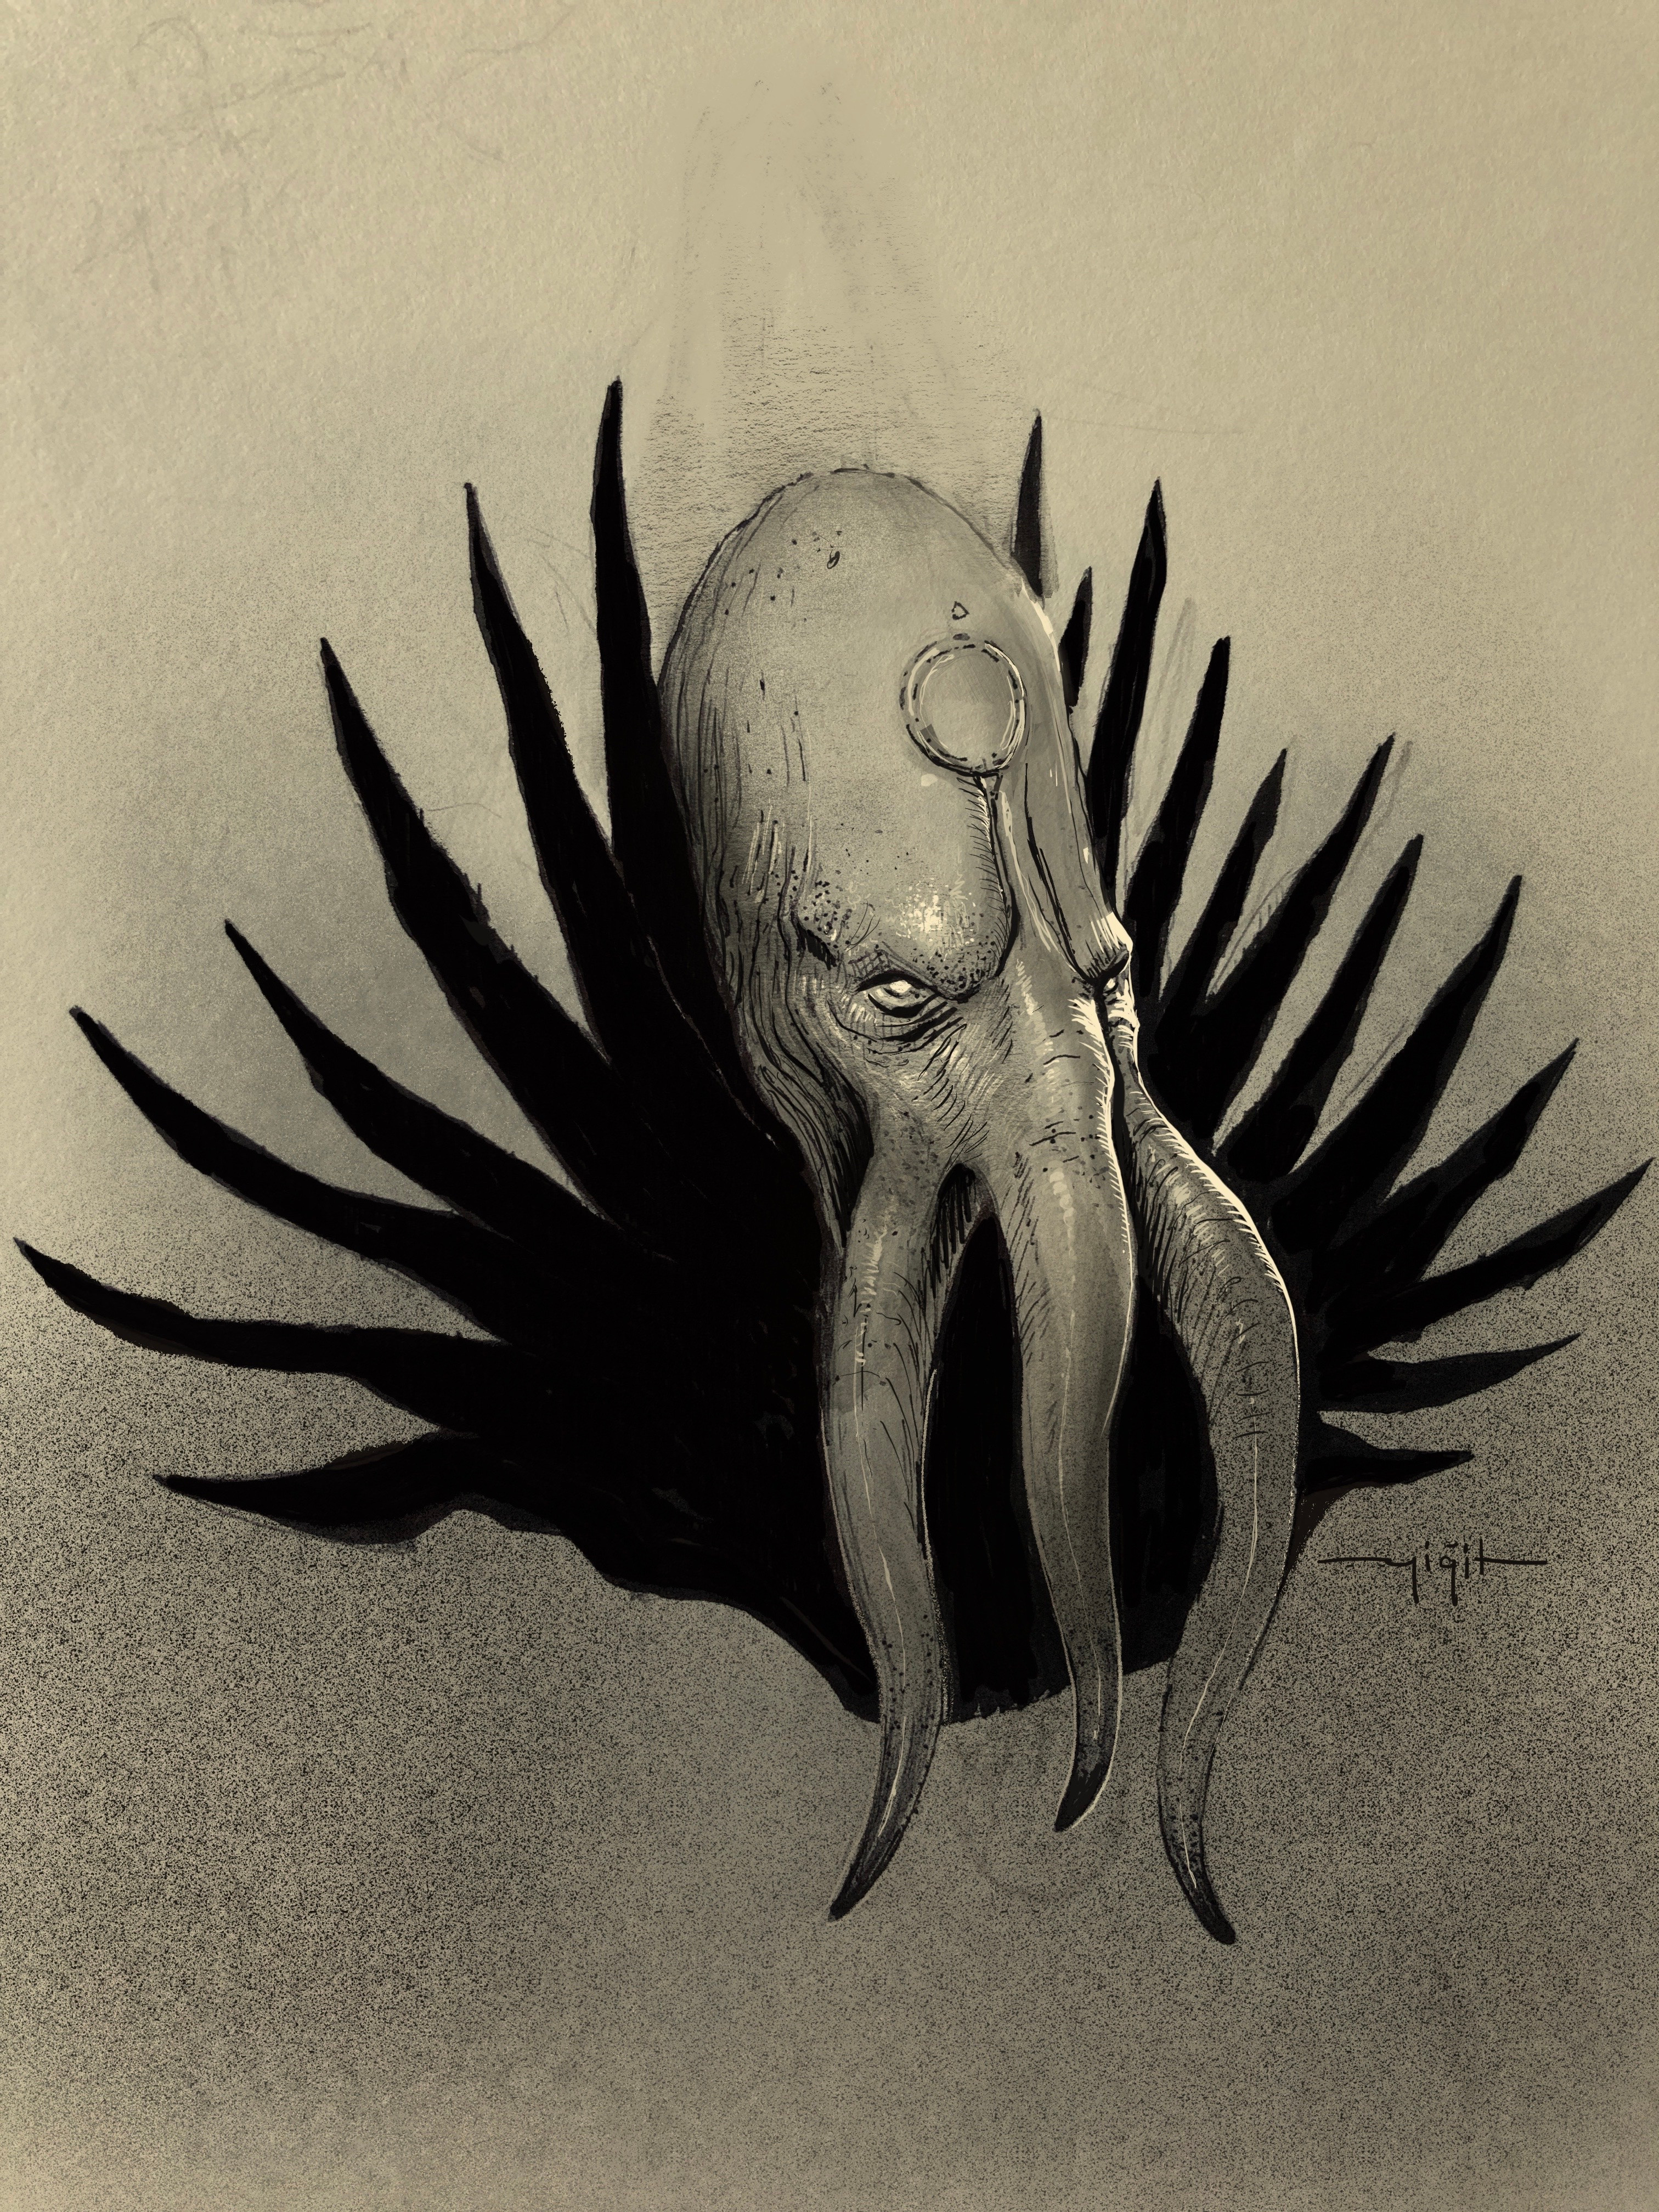 An Illithid or mind flayer